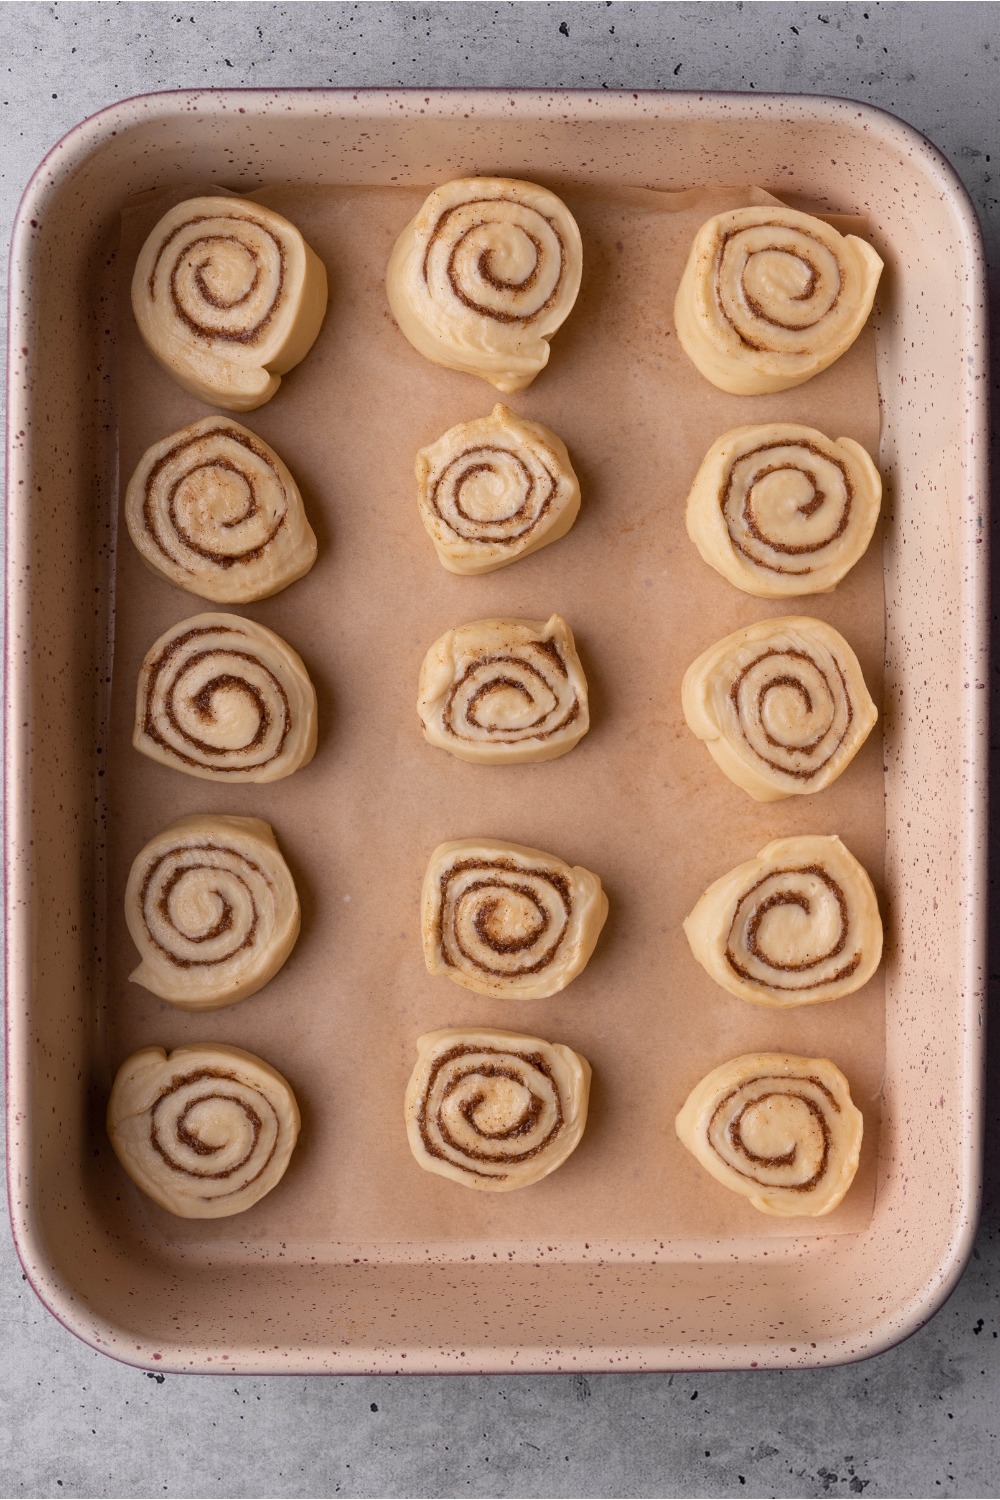 A baking pan with uncooked cinnamon rolls.